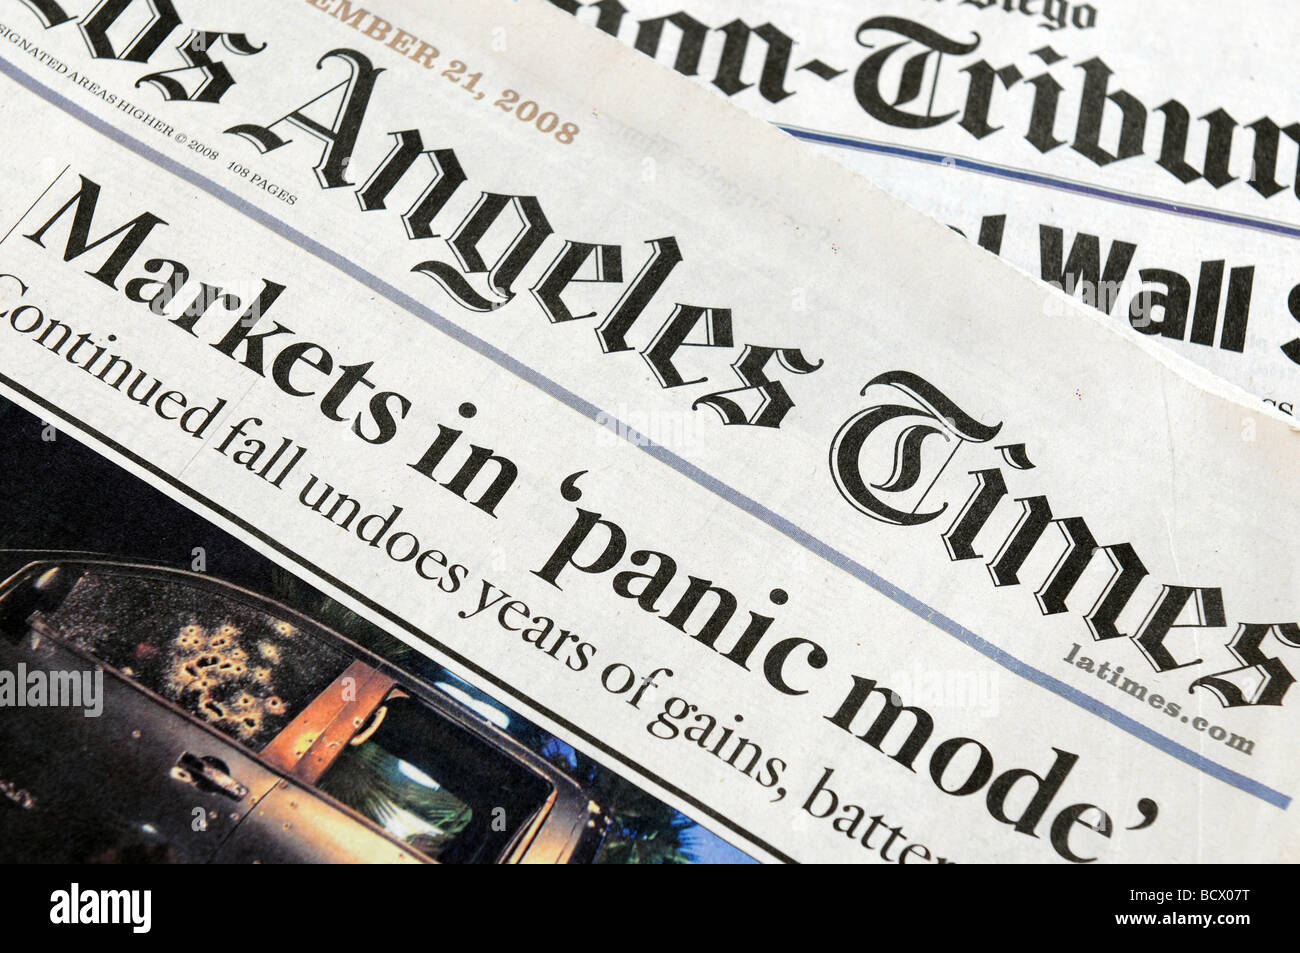 Markets In Panic Mode - newspaper headlines from November 21st, 2008 as the stock market melts down. Stock Photo